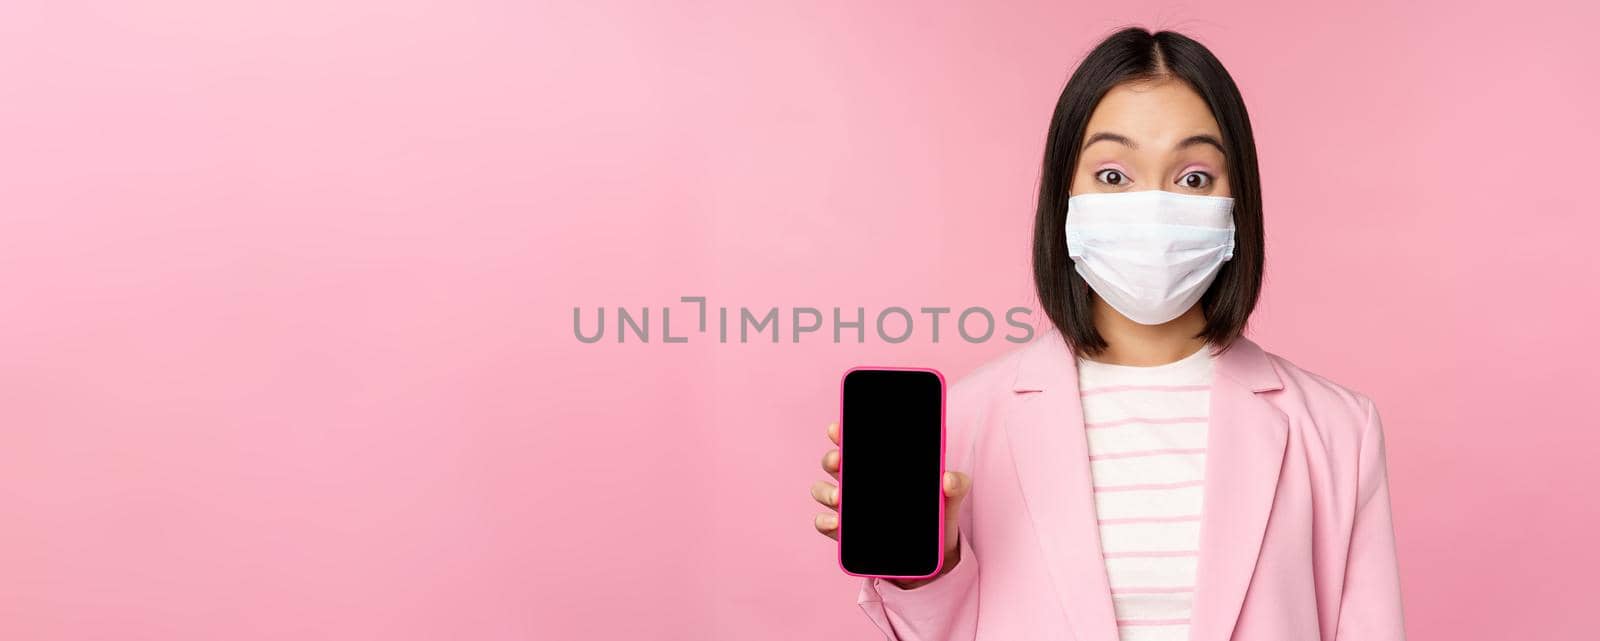 Portrait of smiling korean saleswoman in medical face mask, business suit, showing smartphone screen, standing over pink background.